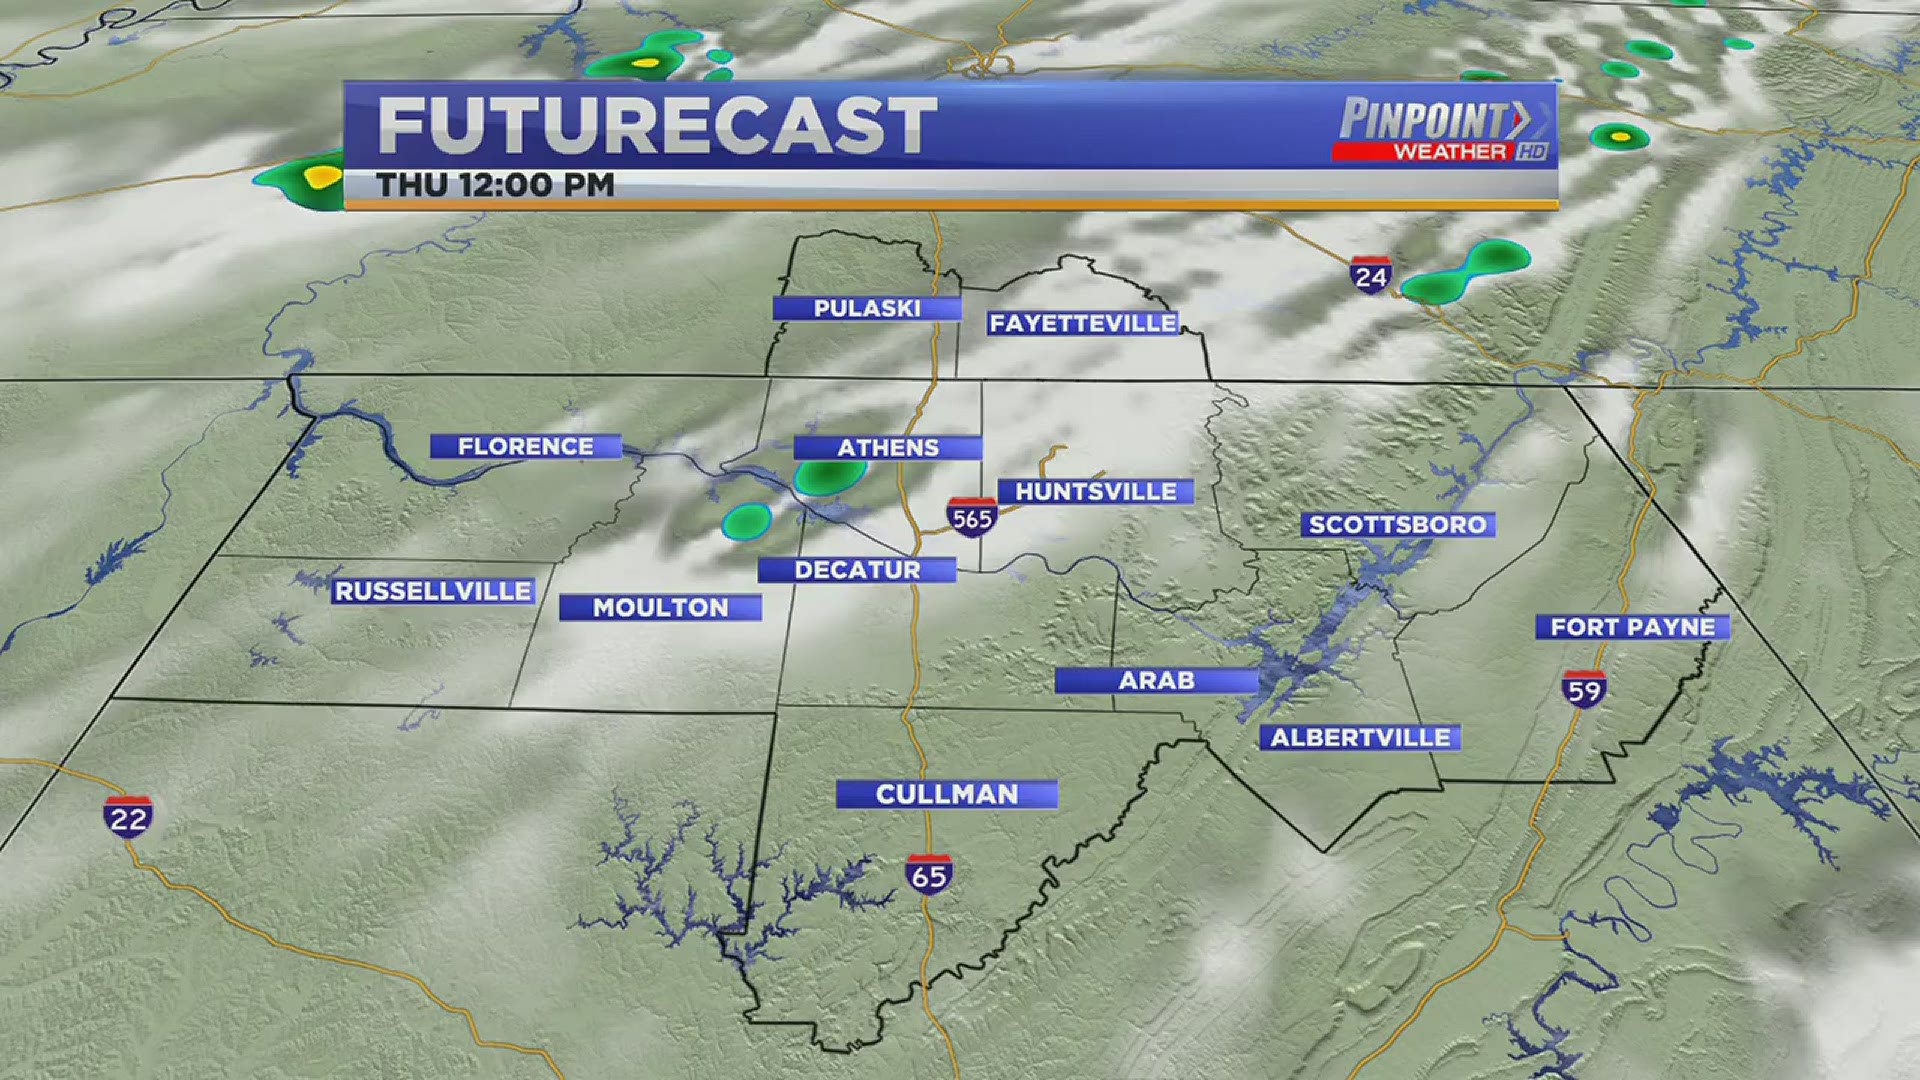 Rain chances are in the forecast Thursday and Friday